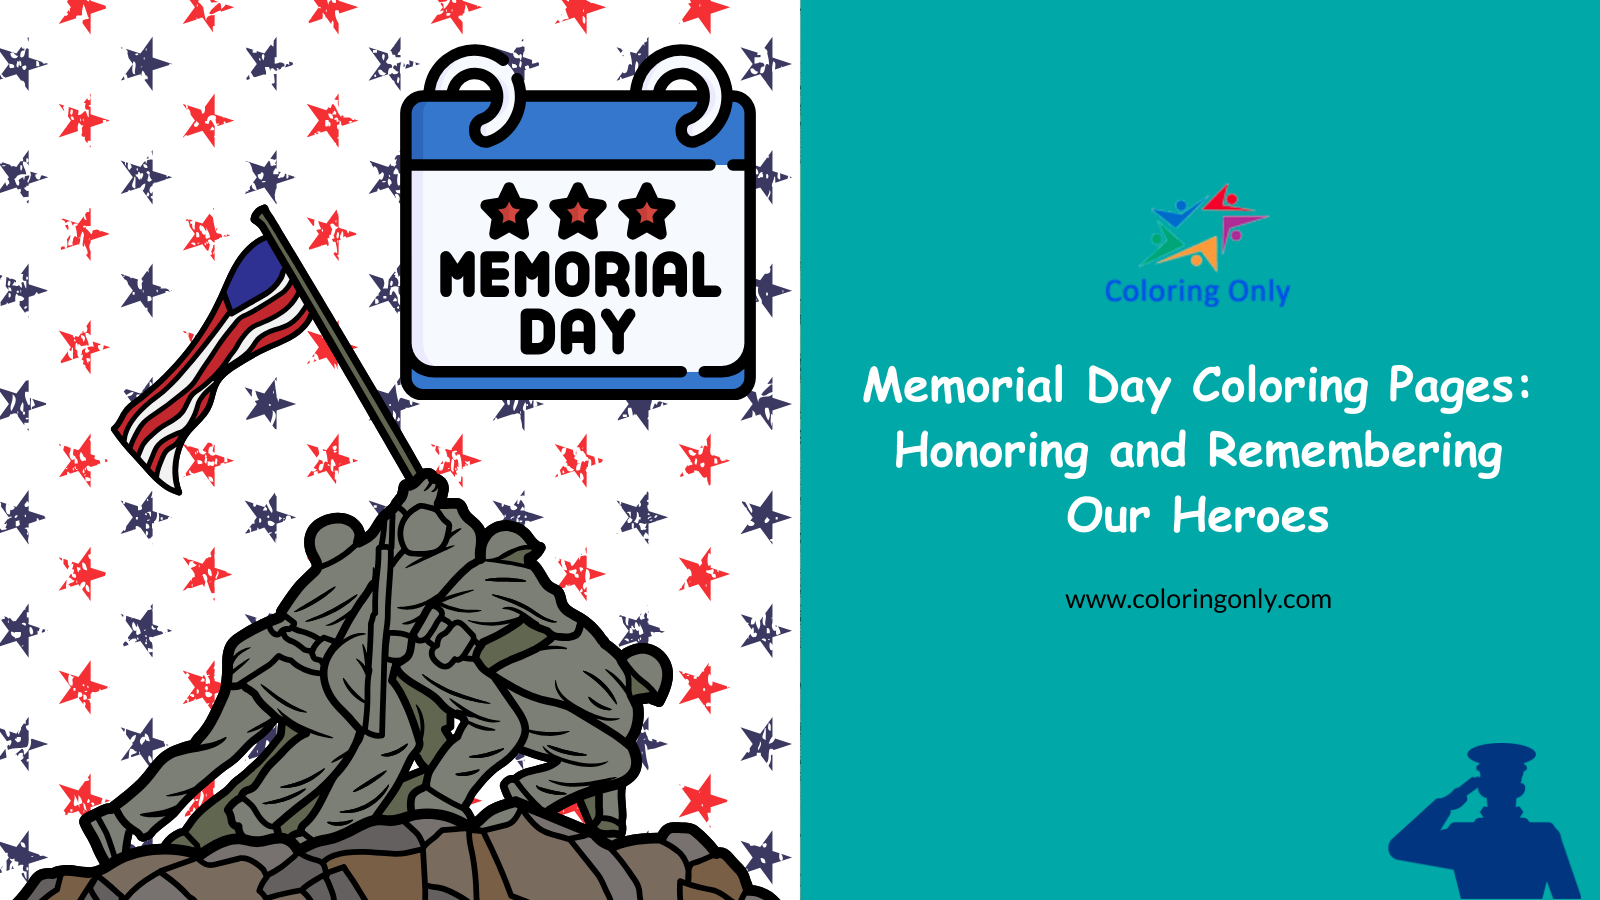 Memorial Day Coloring Pages: Honoring and Remembering Our Heroes